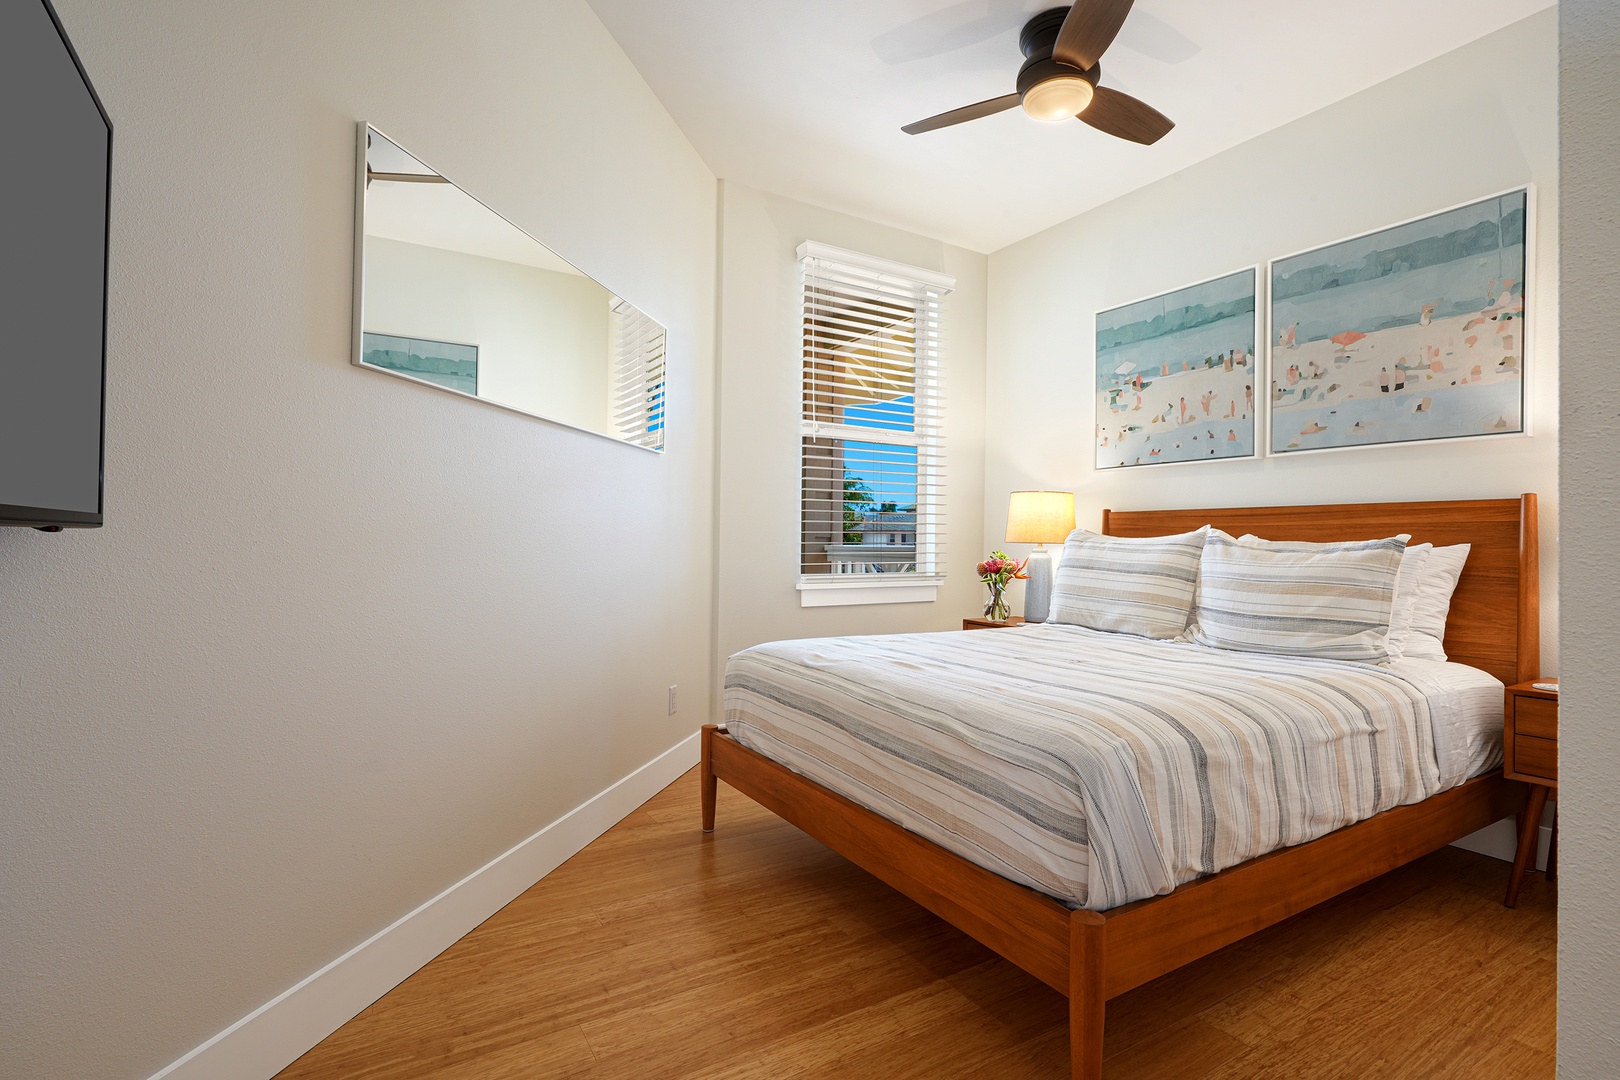 Koloa Vacation Rentals, Pili Mai 11K - Guest Bedroom 3 has a queen bed and access to a shared bathroom